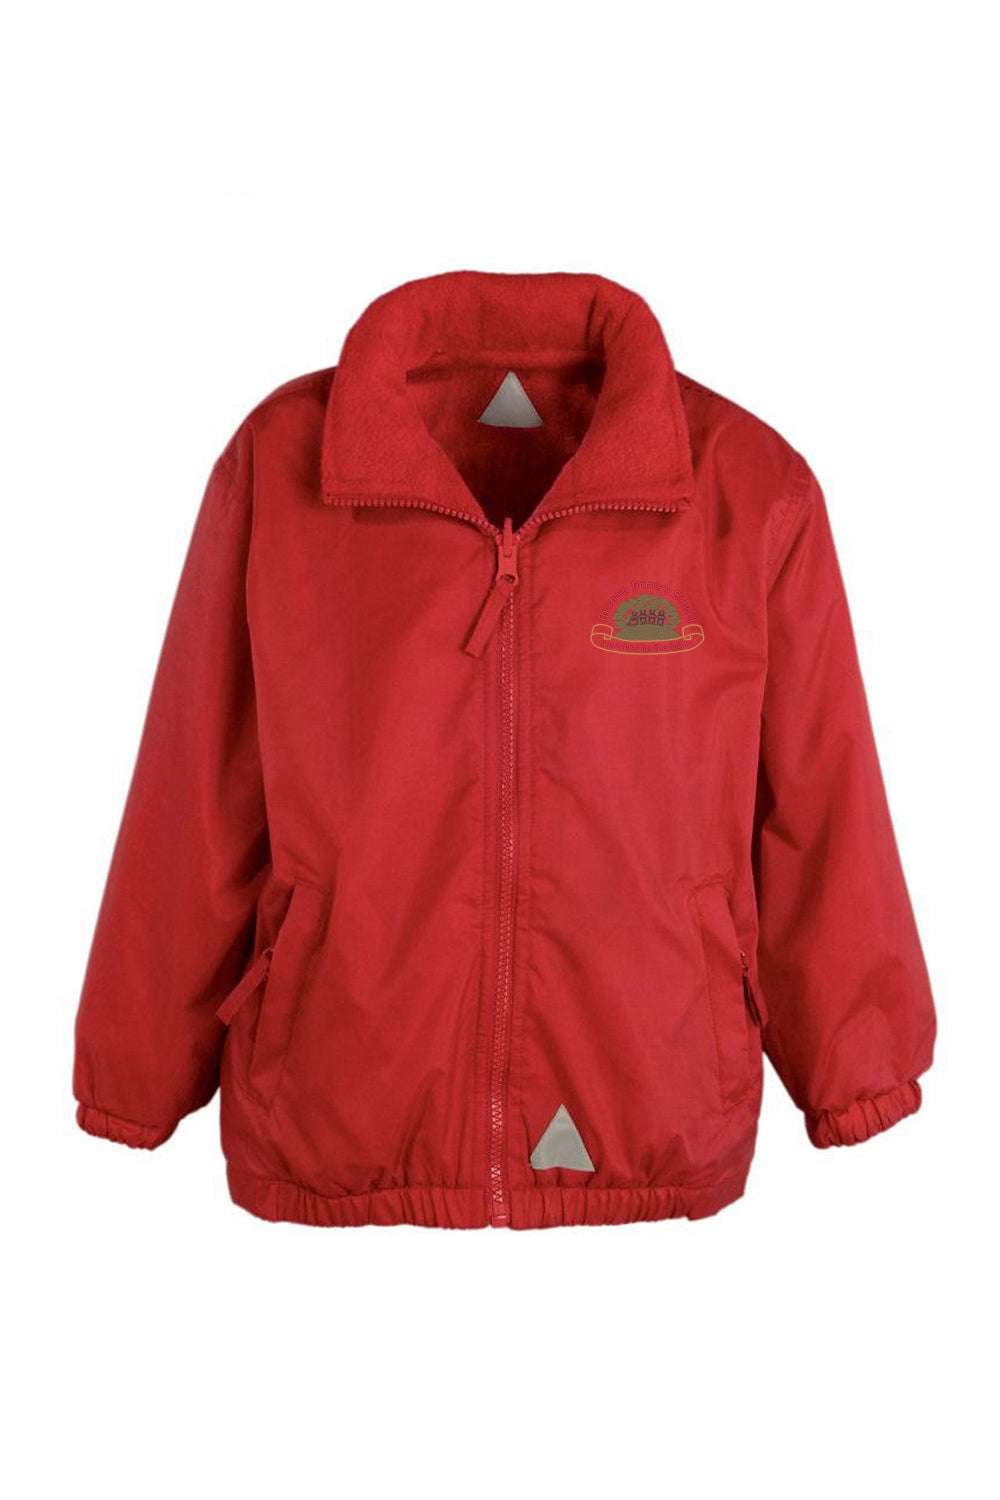 Thornhill Red Shower Jacket